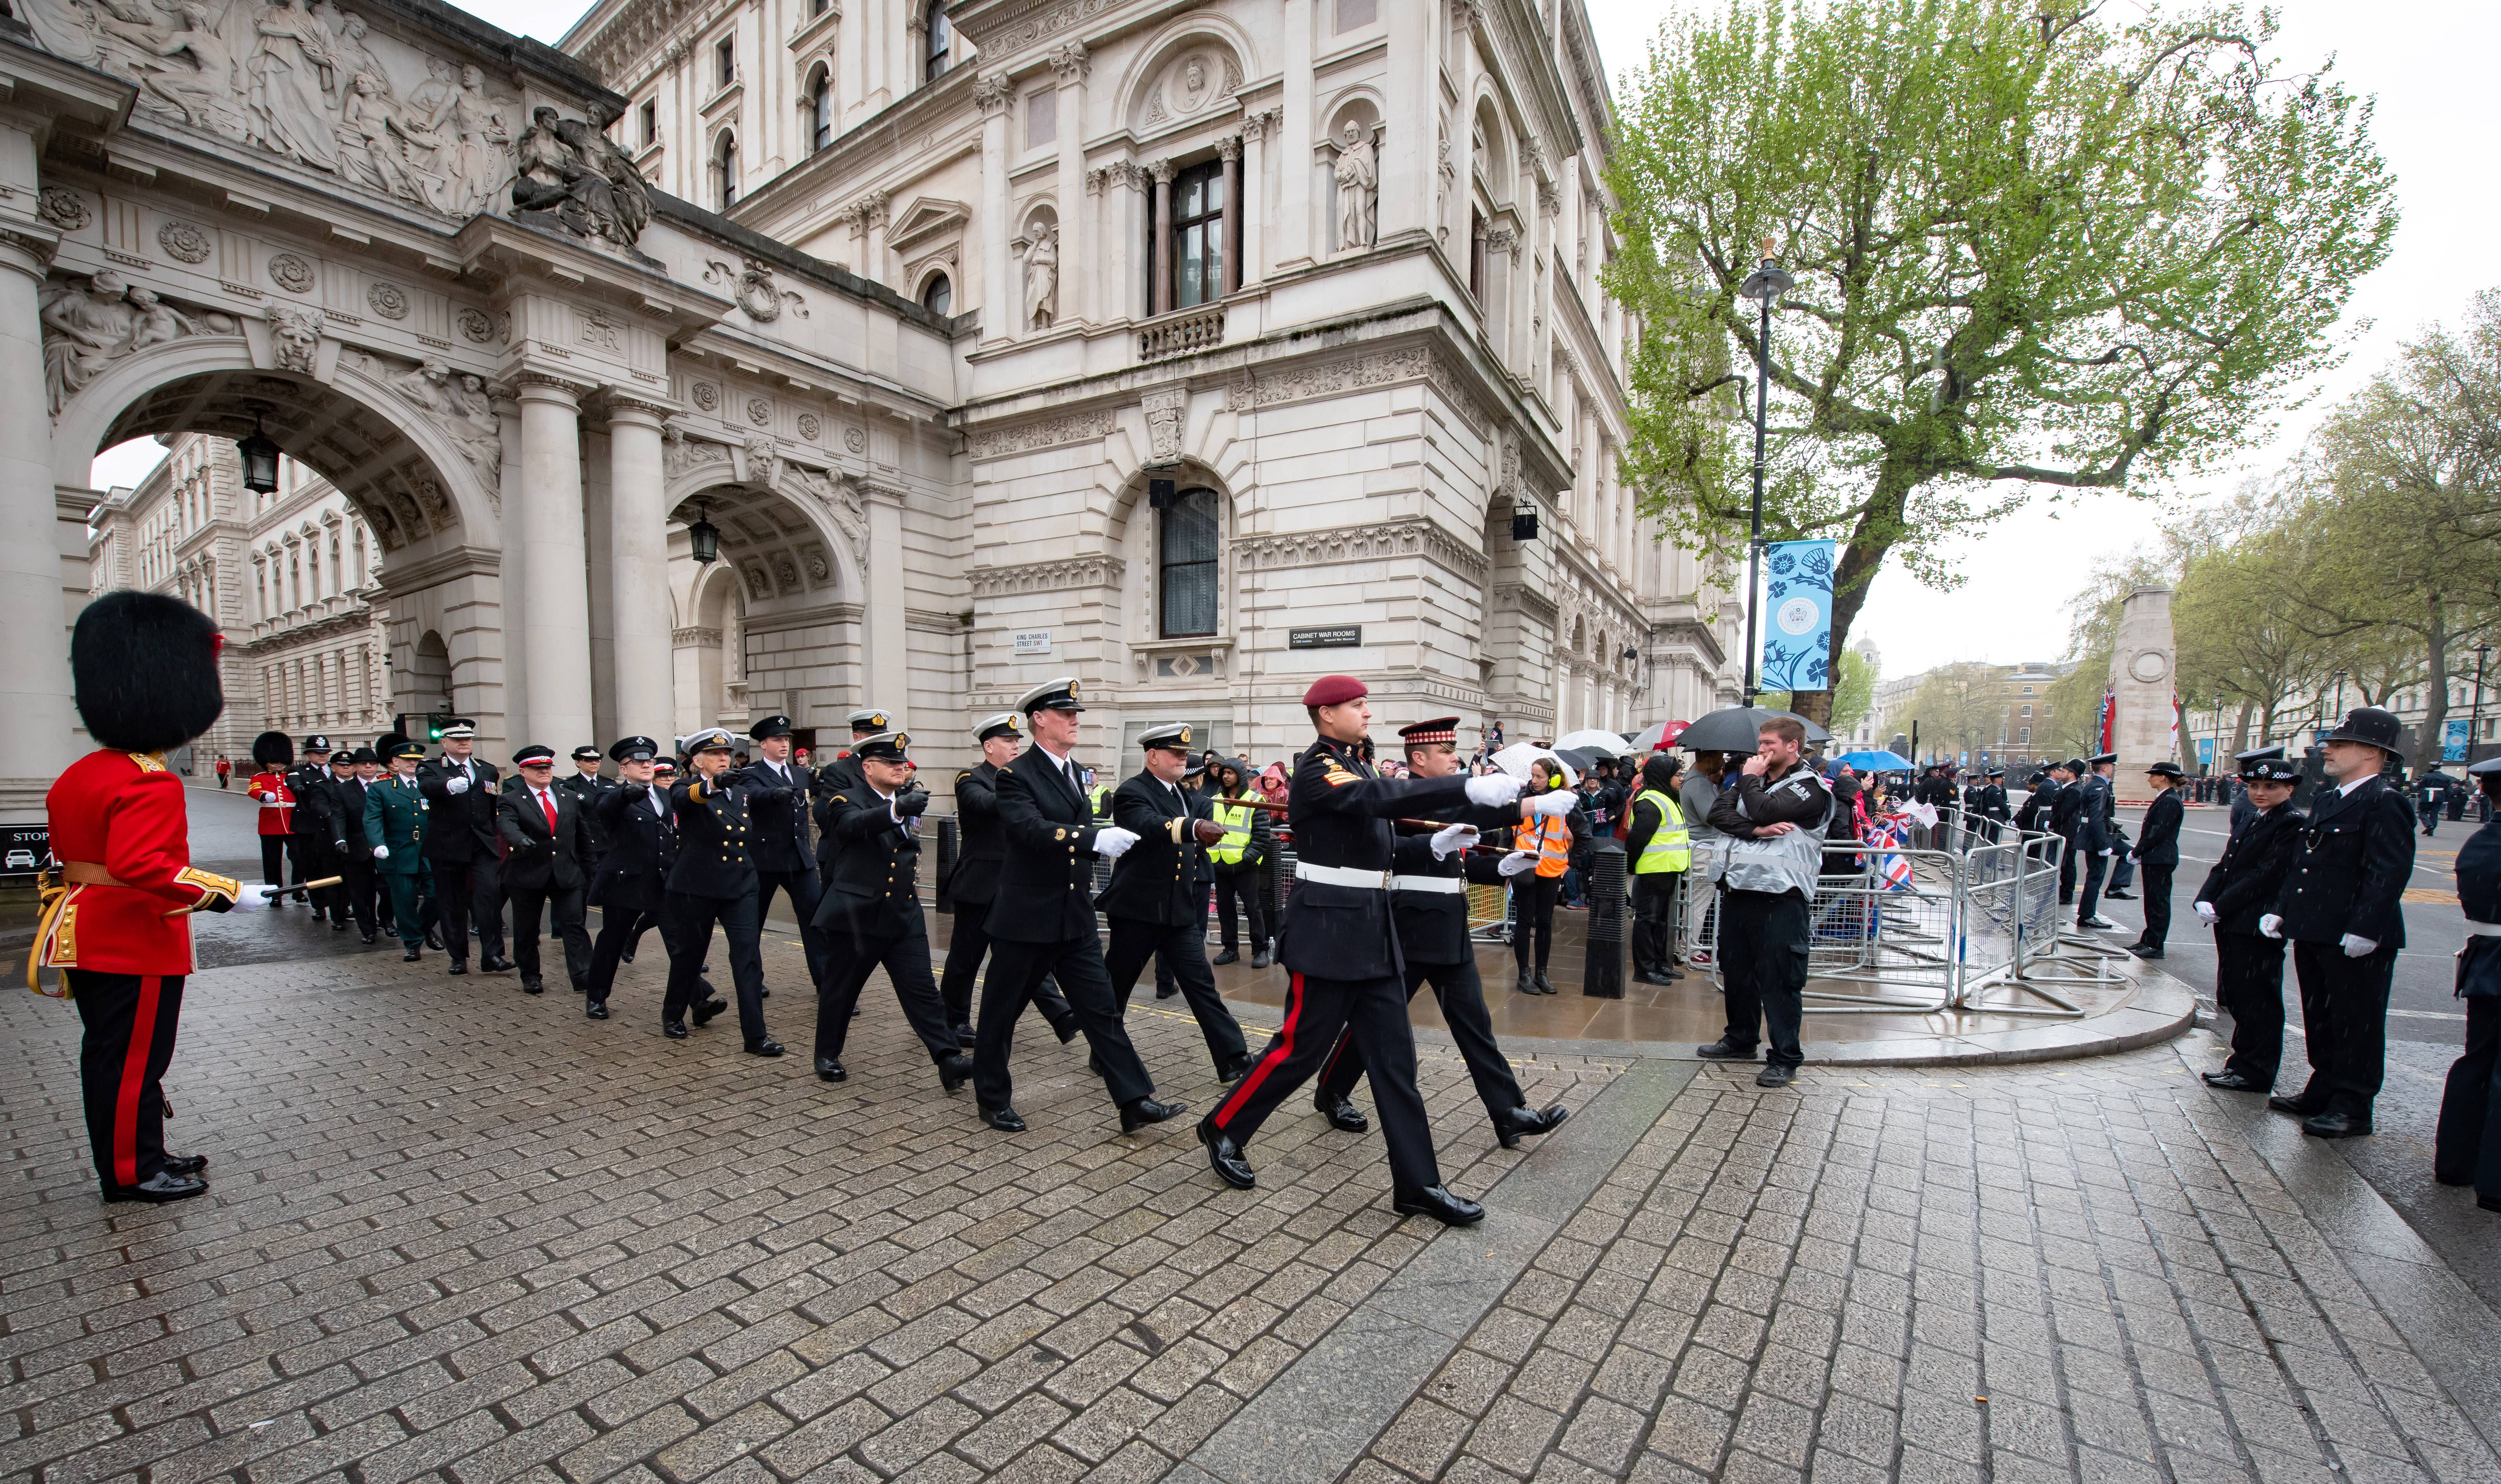 Uniformed members of the Civil Service Contingency marching through Westminster with The Cenotaph in the background